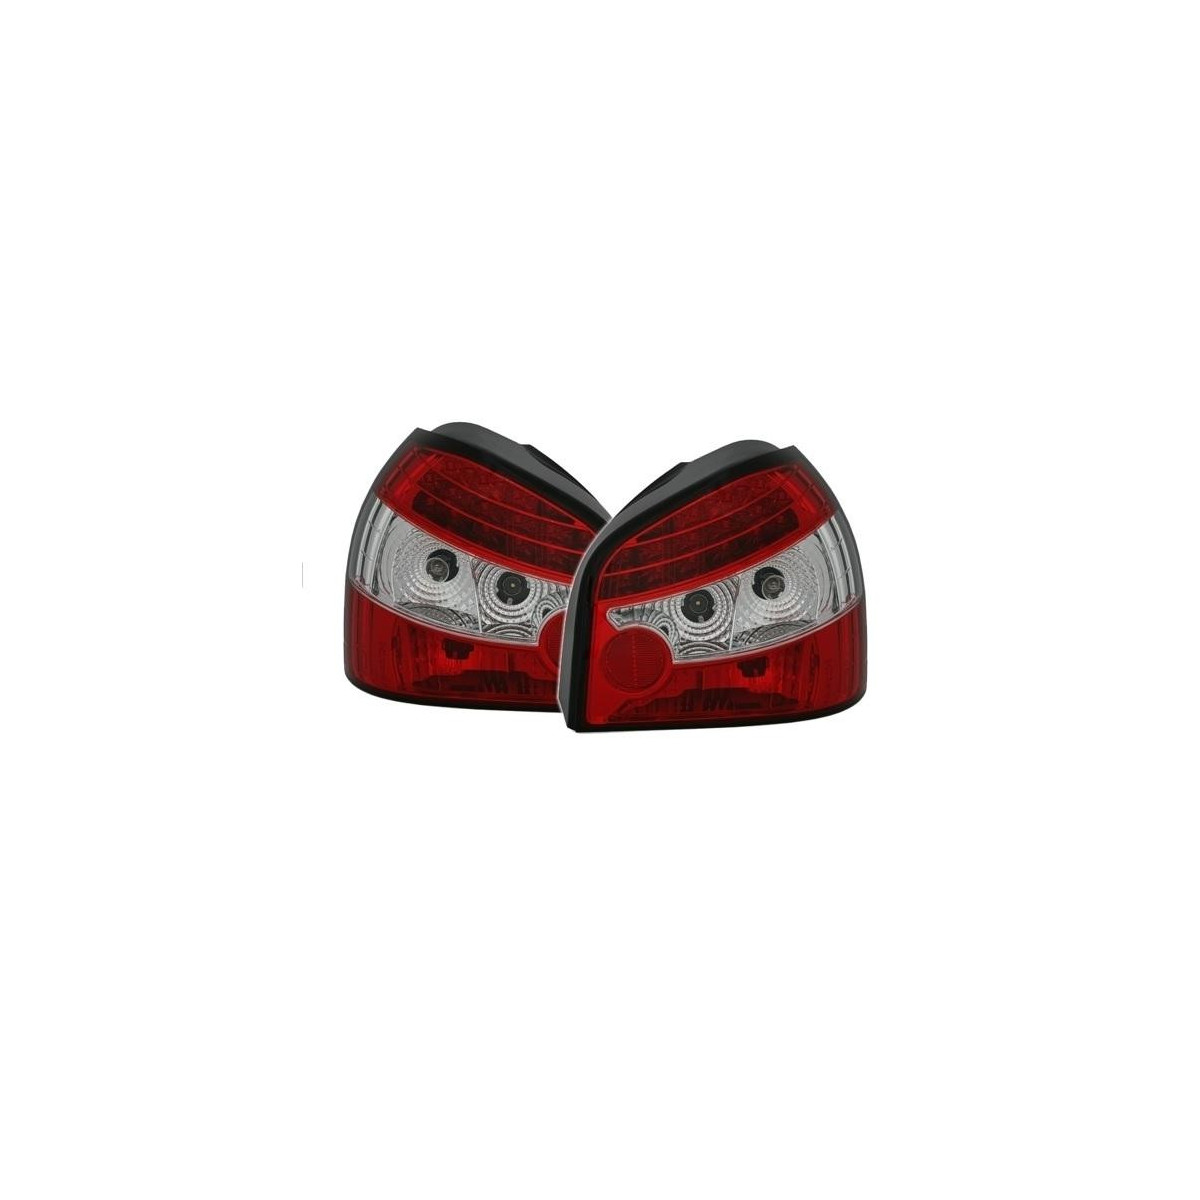 LAMPY DIODOWE AUDI A3 96-03 RED WHITE